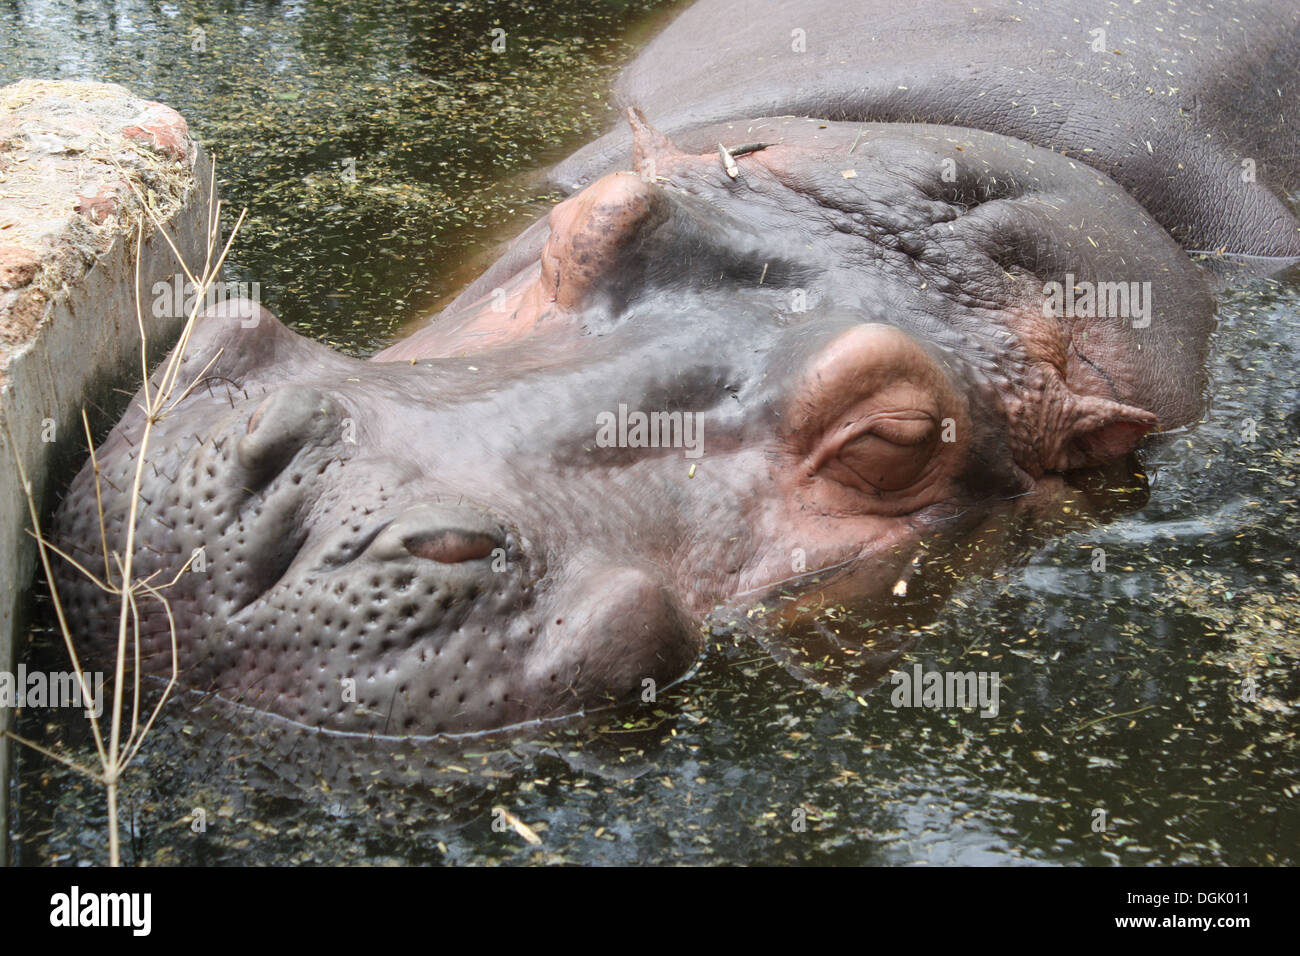 Hippopotamus napping in a a swamp. Stock Photo